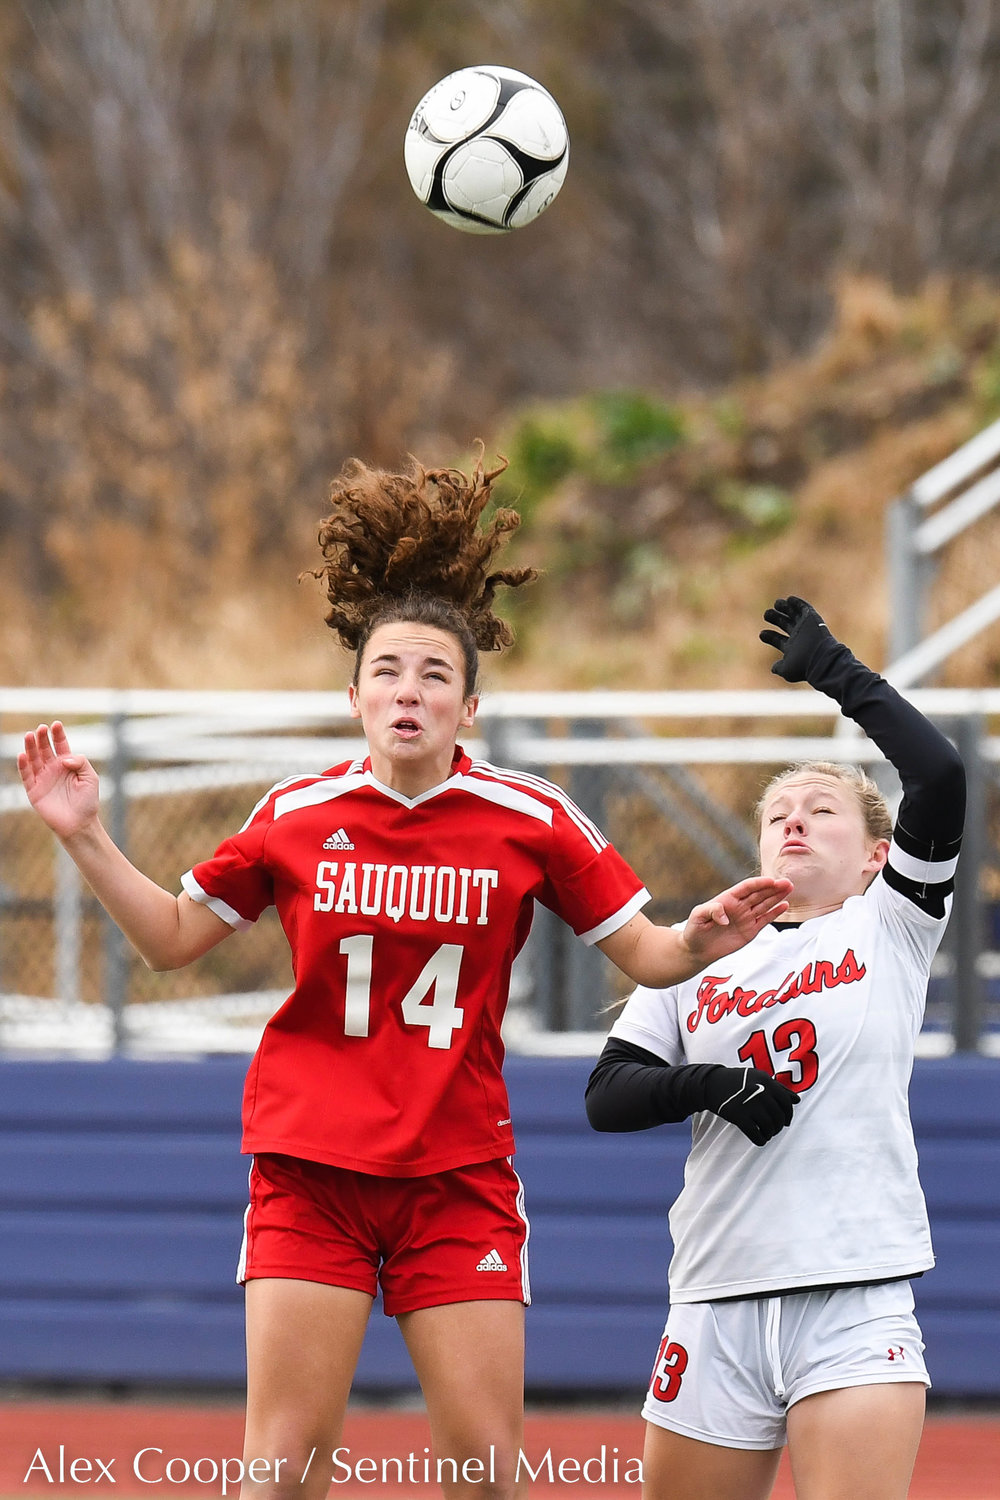 Sauquoit Valley player Ella Dischiavo (14) heads the ball as Waterford-Halfmoon player Addyson Galuski (13) defends during the Class C state final on Sunday at Cortland High School. The Indians lost 6-3.